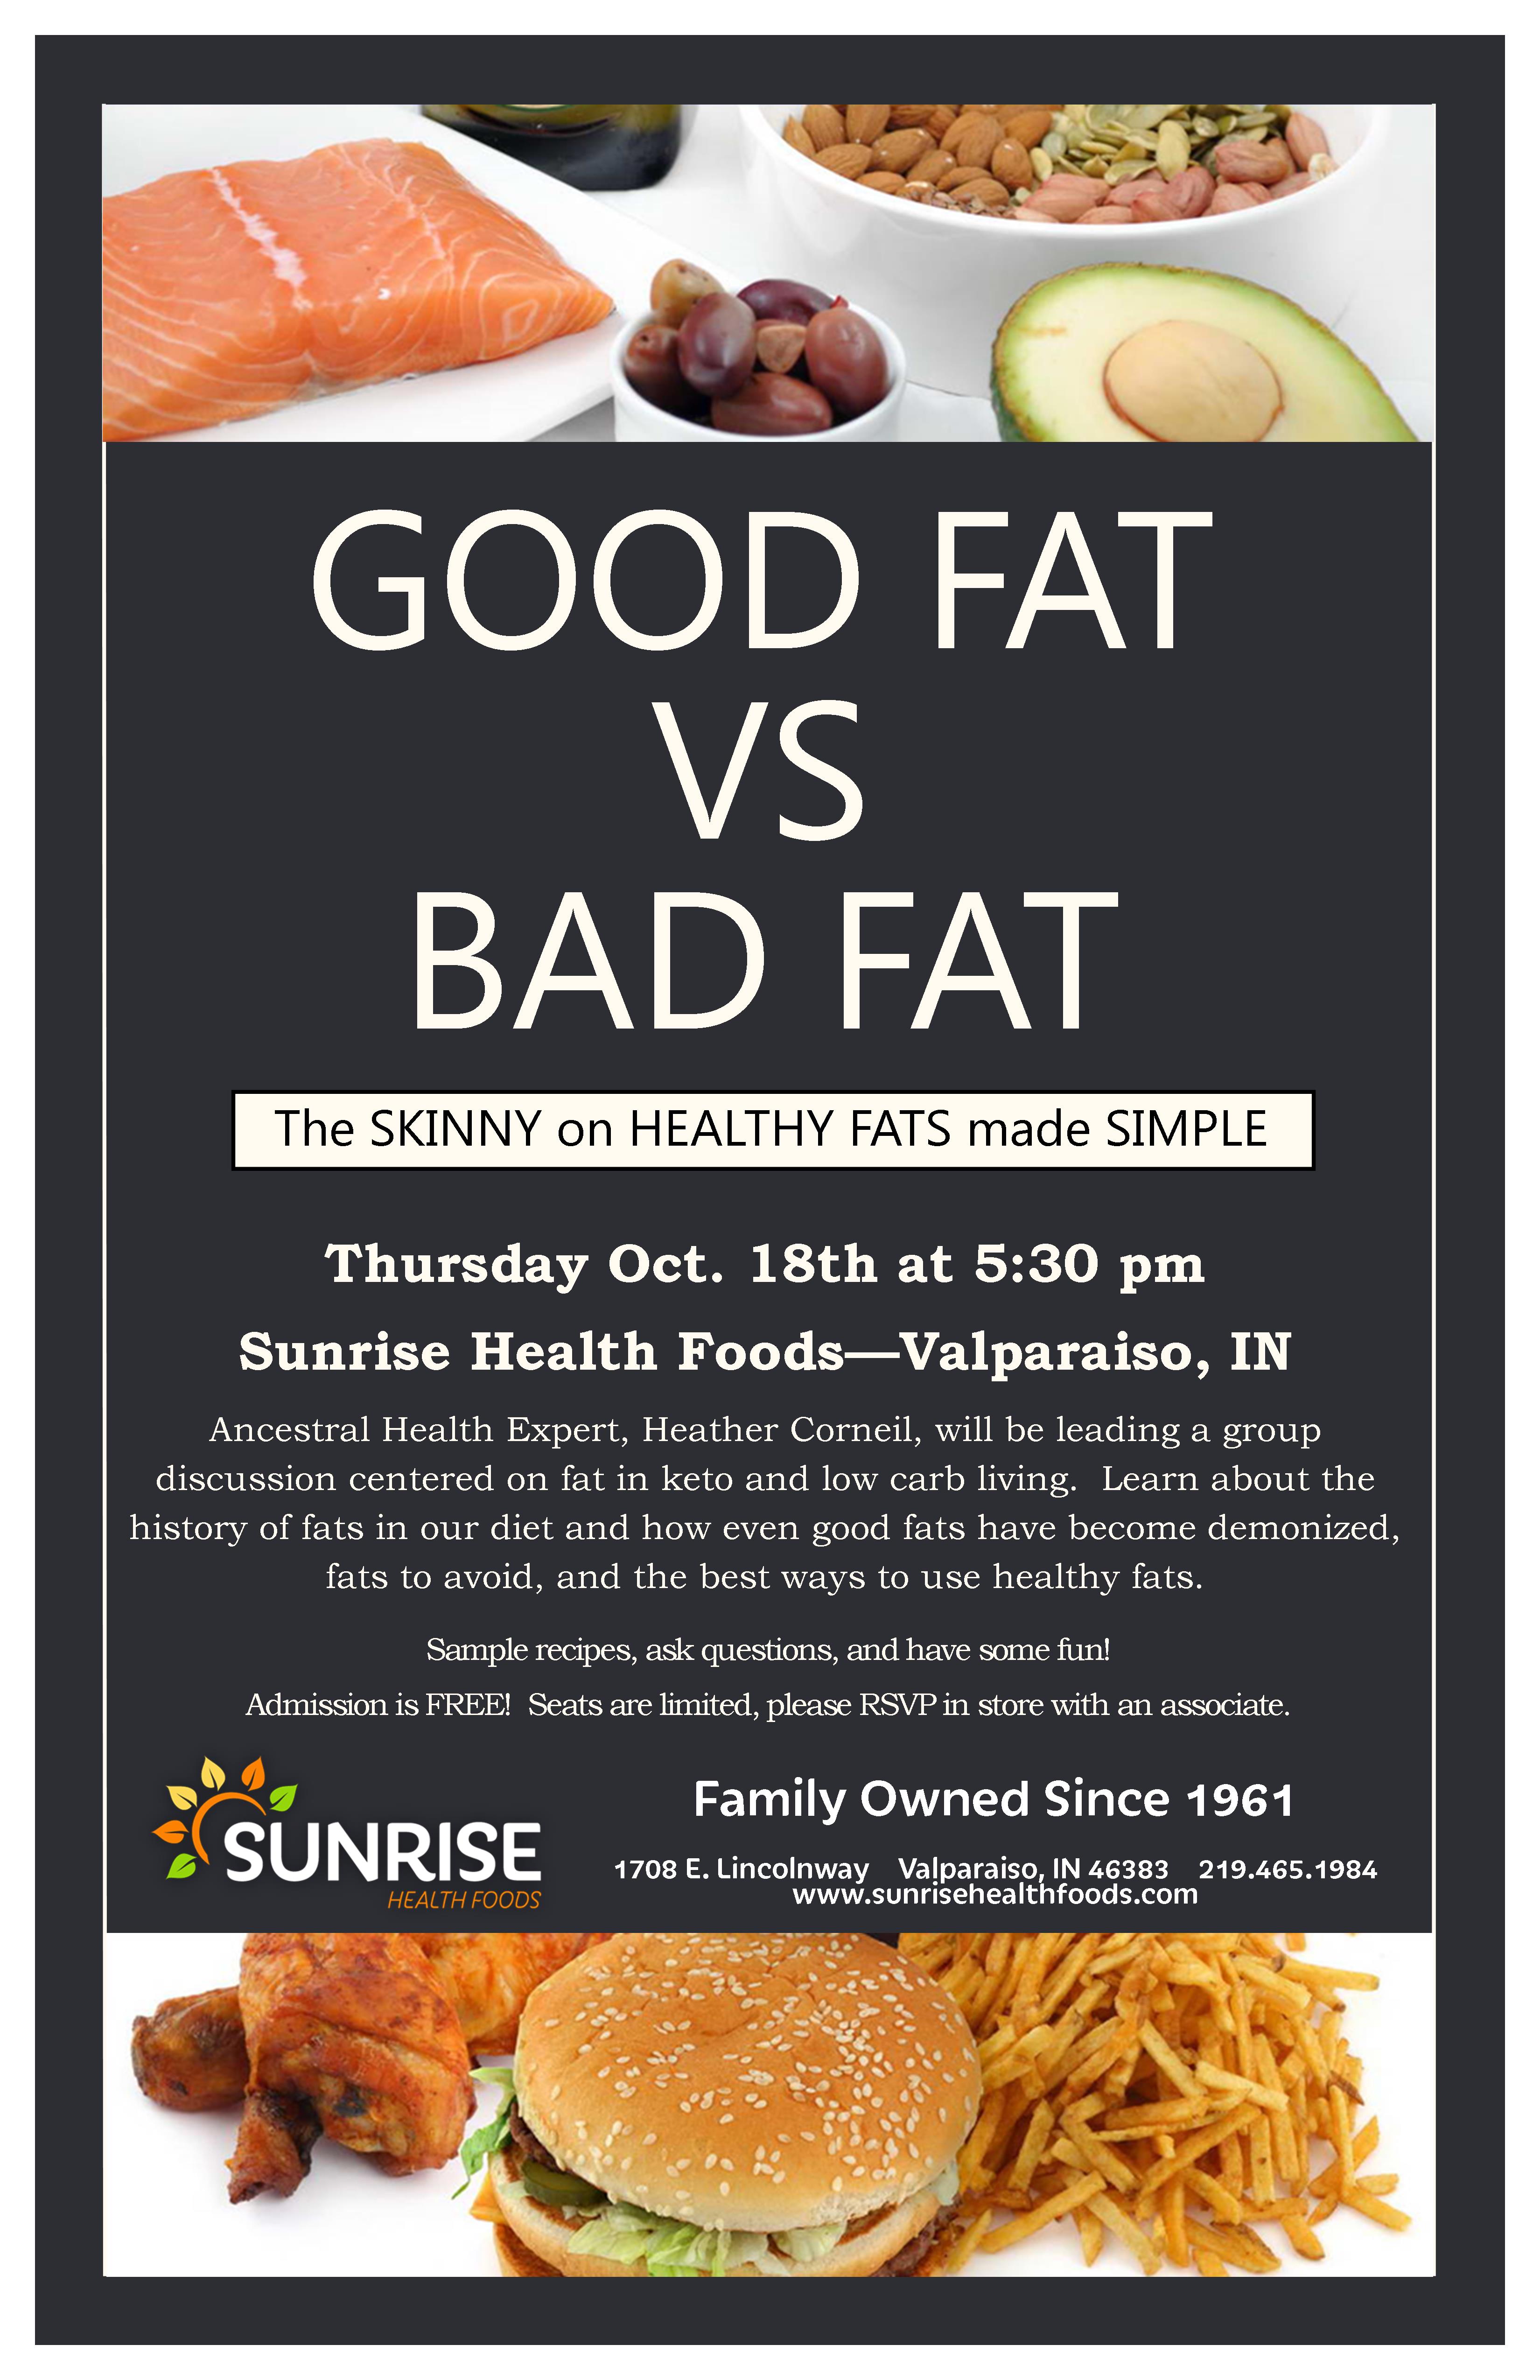 Good fat vs bad fat discussion group